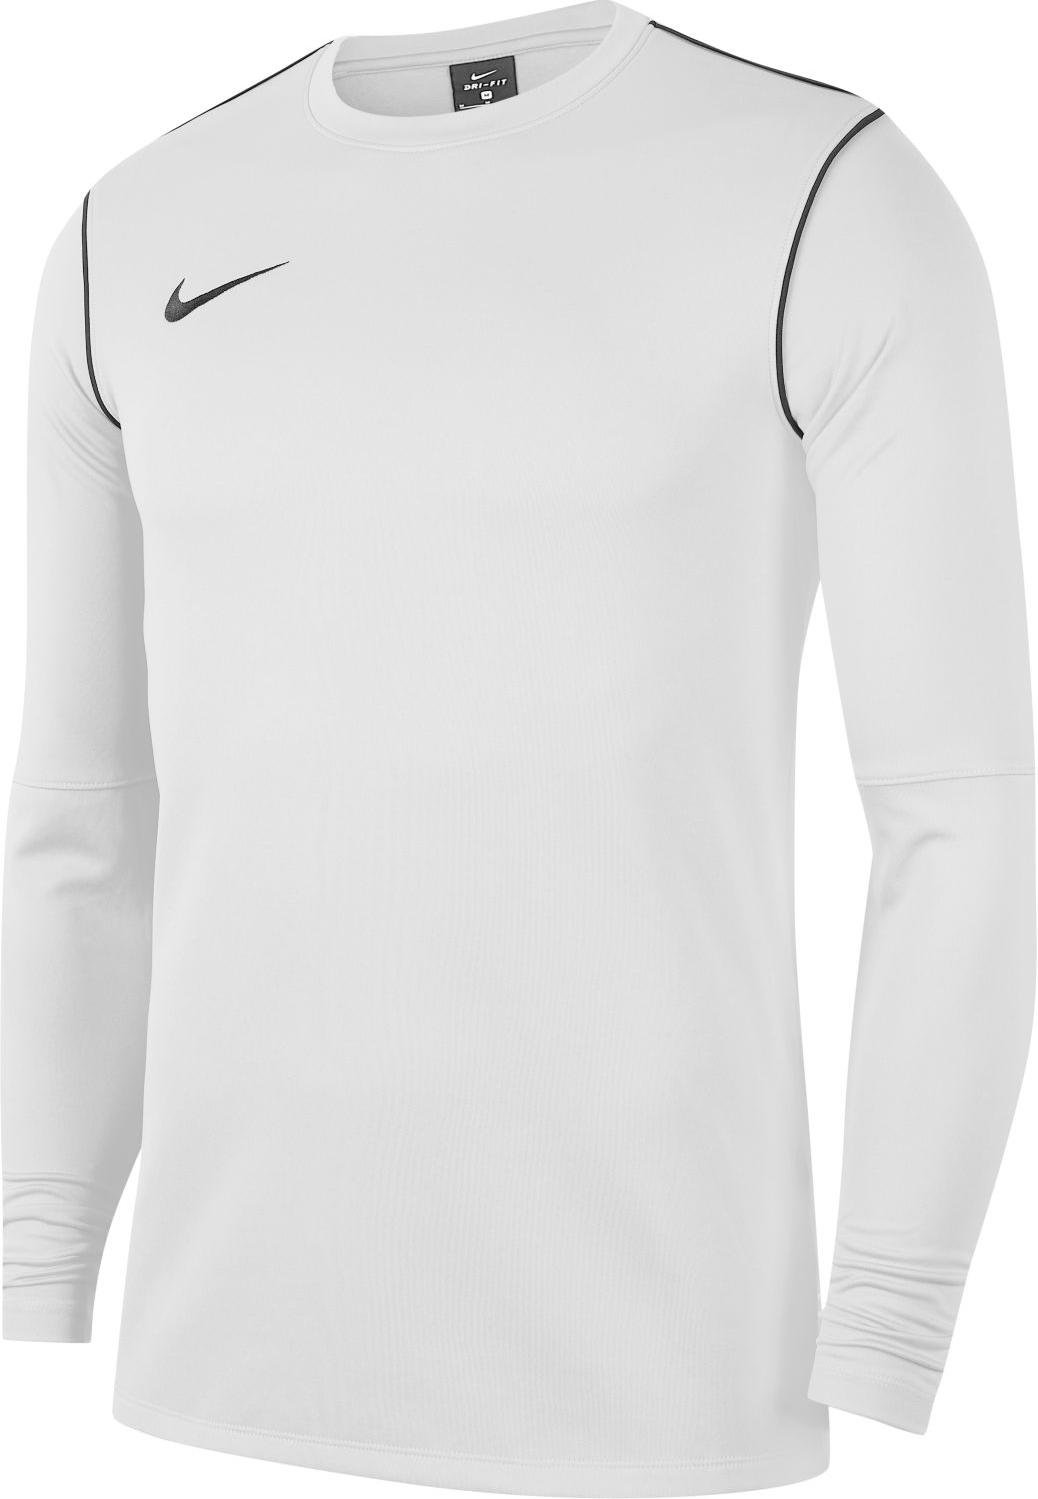 Mikica Nike M NK DRY PARK20 CREW TOP